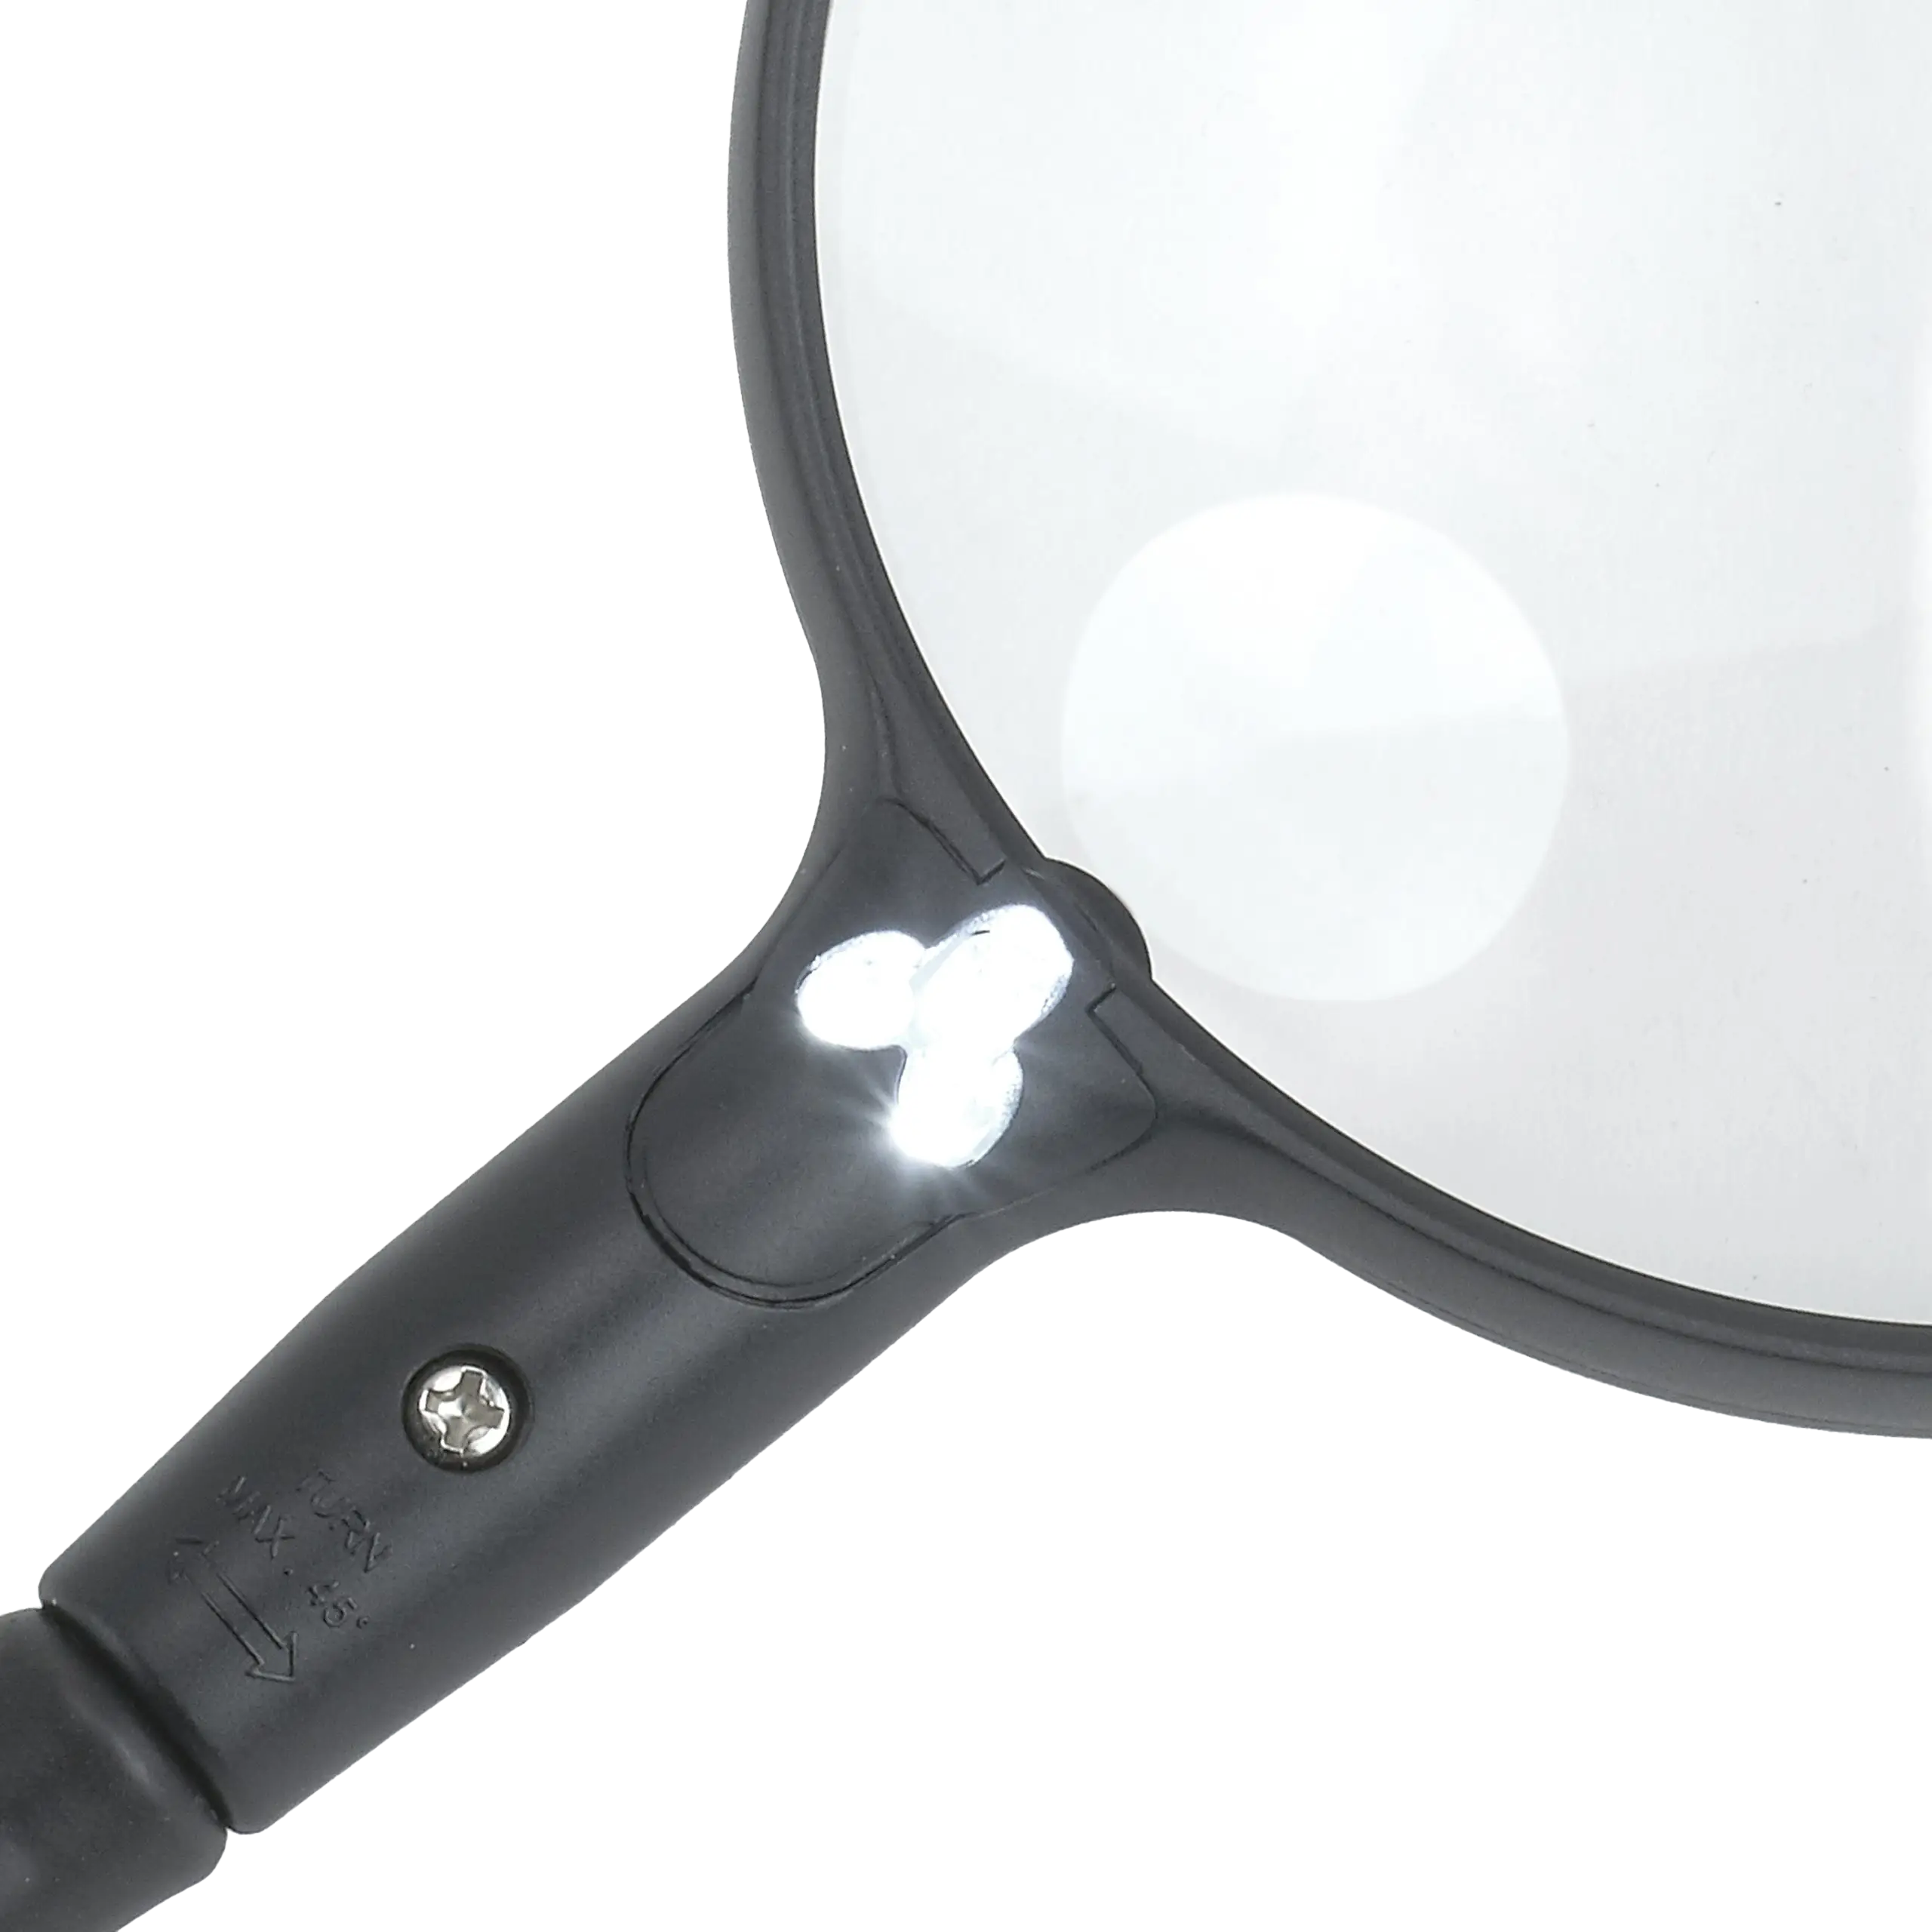 Handheld Magnifier with 20 LED Light 110mm Extra Large Magnifying